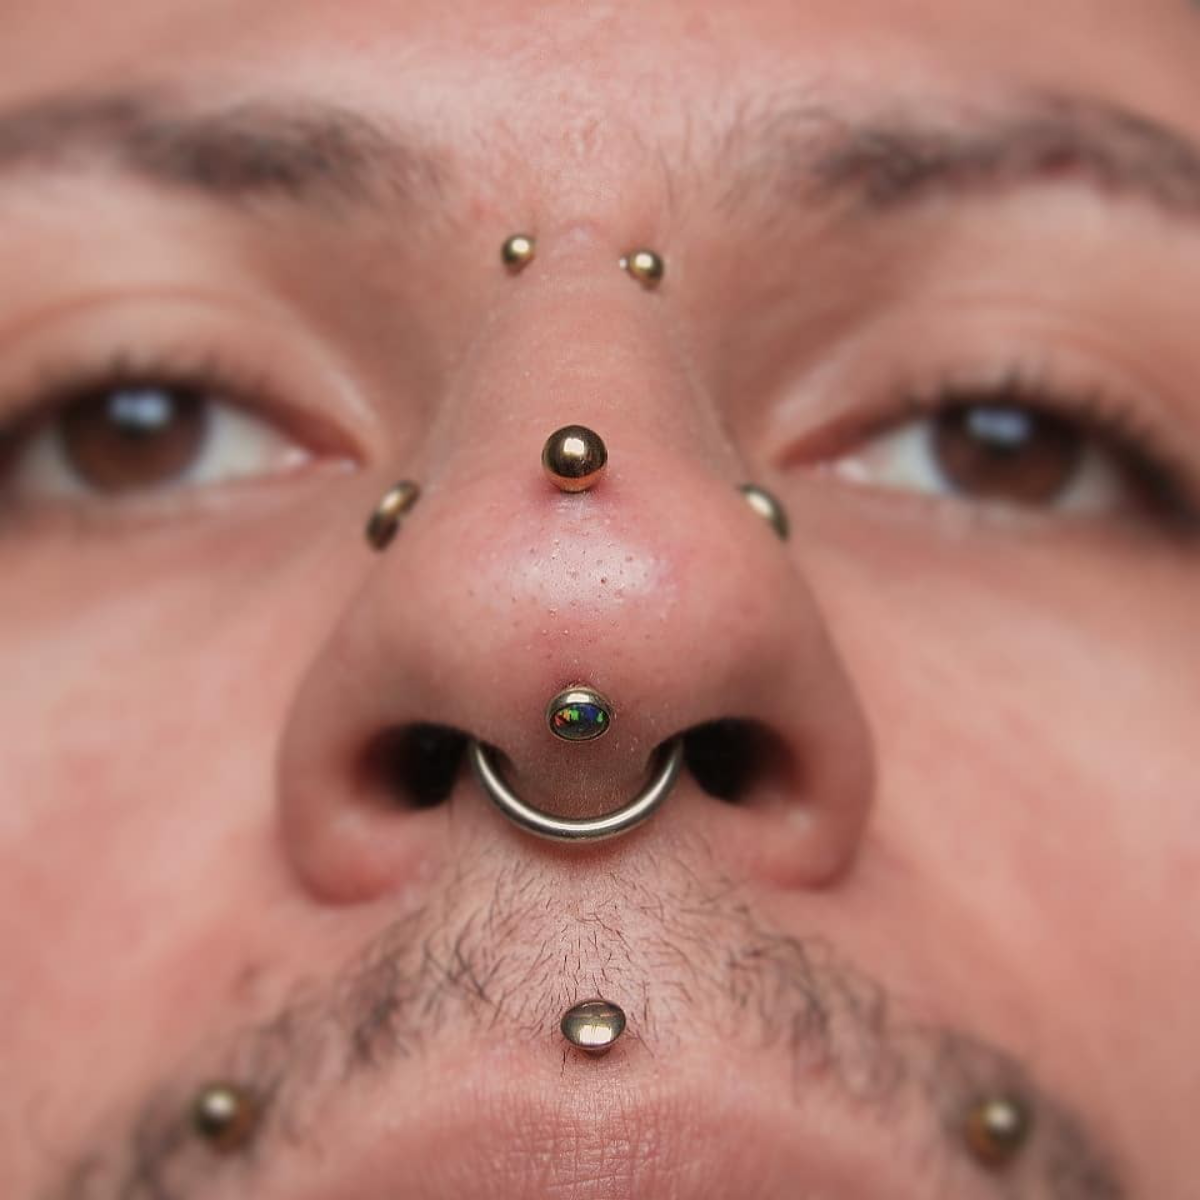 17 man with multiple face nose and mouth piercings